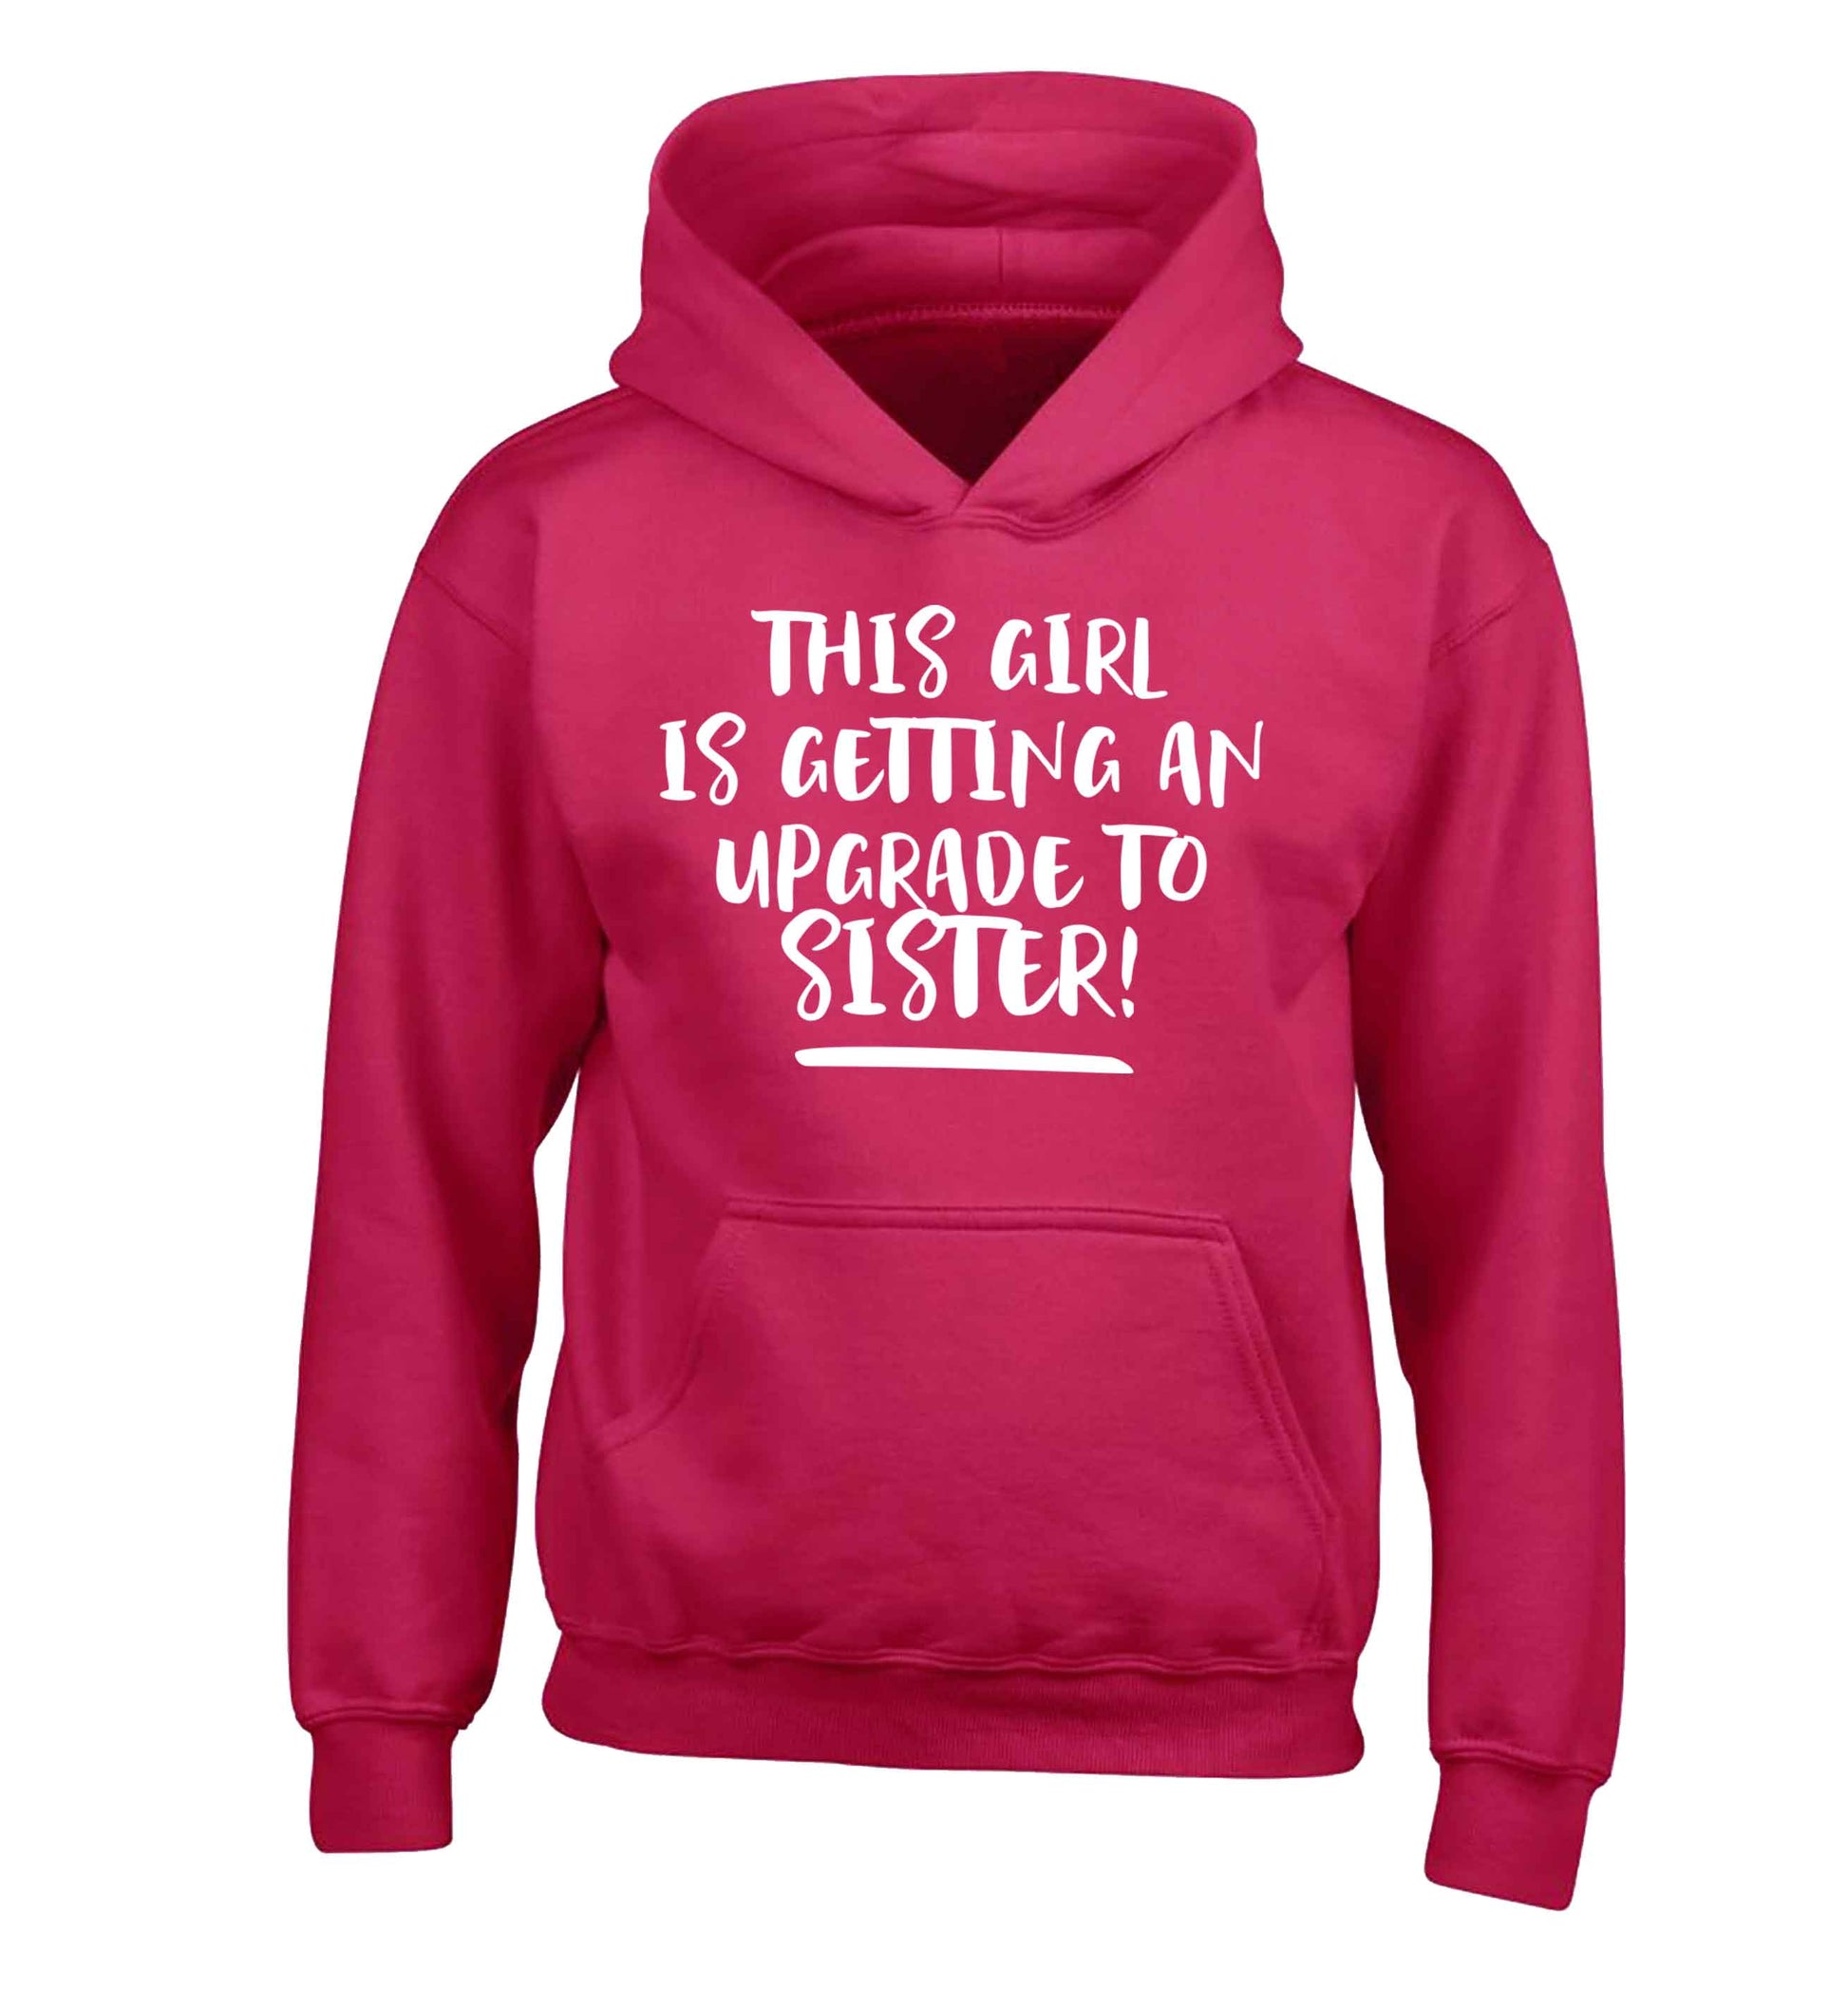 This girl is getting an upgrade to sister! children's pink hoodie 12-13 Years